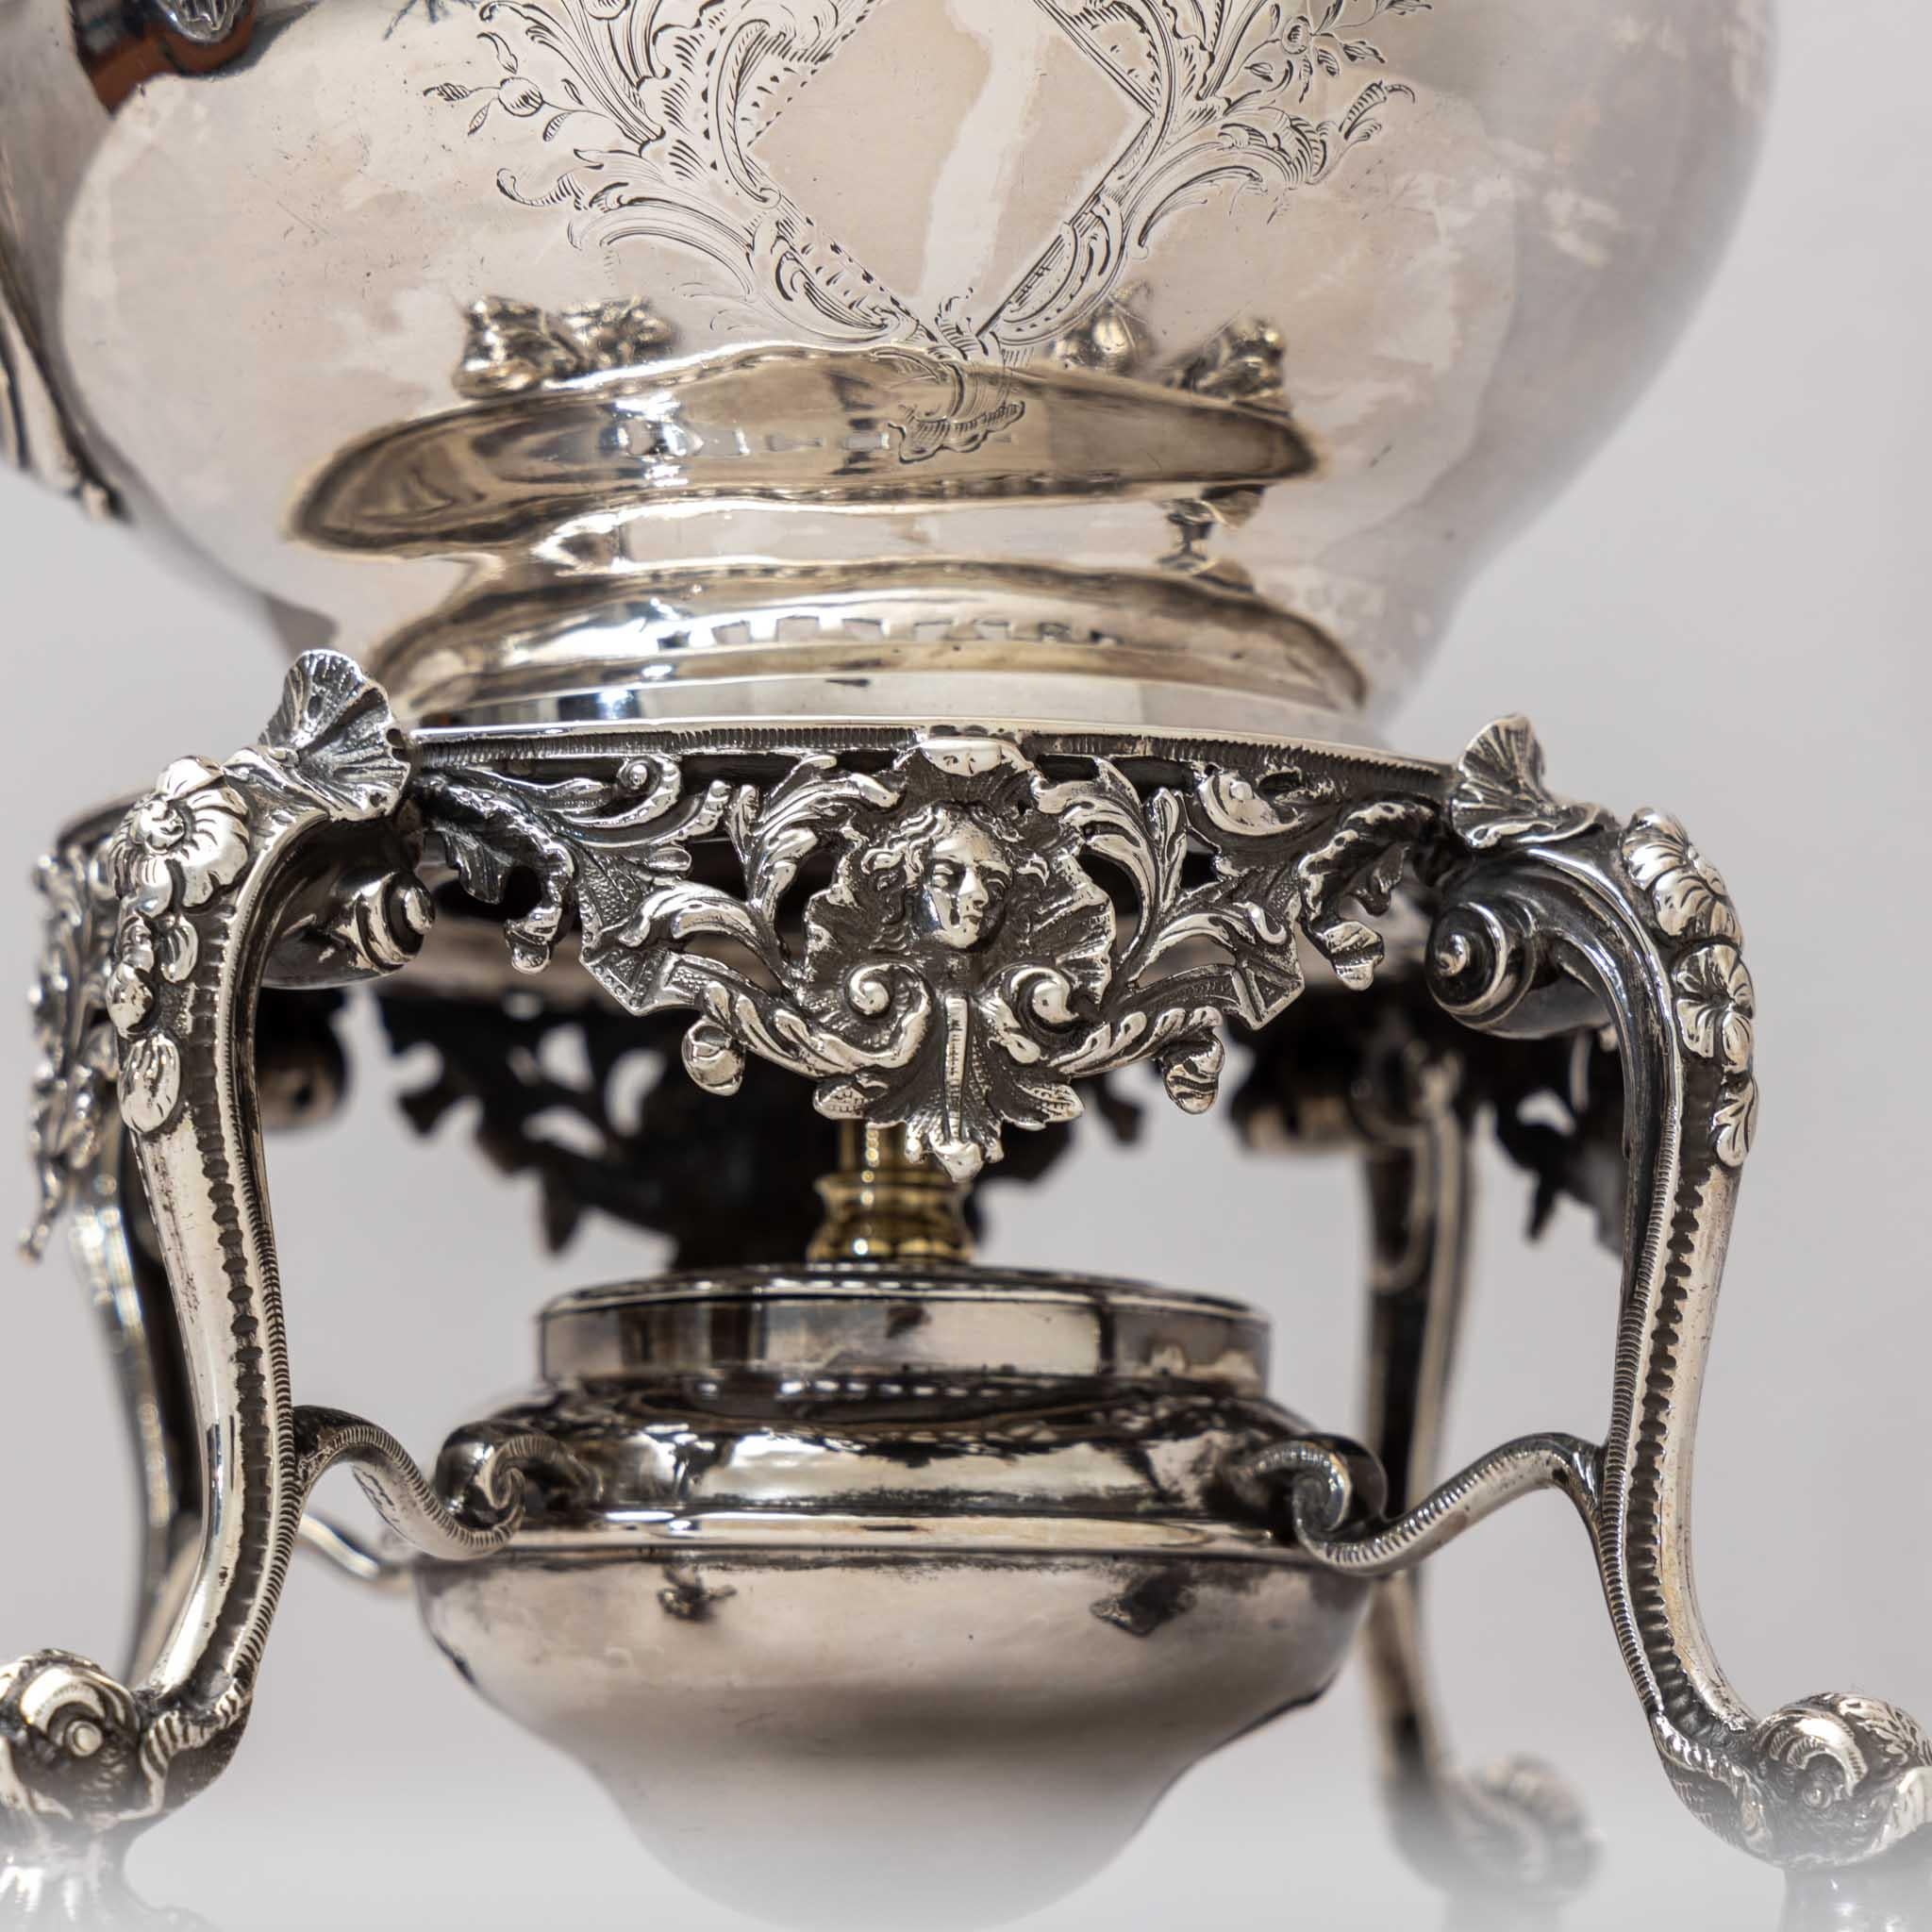 A silver pot with an elegant handle with raffia wrapping on a matching teapot warmer on four legs. The jug with maker’s mark Thomas Heming dates from 1750, the teapot was made in 1818 by Samuel Whitford to match. Weight pot: 985g, stand: 718g. Total